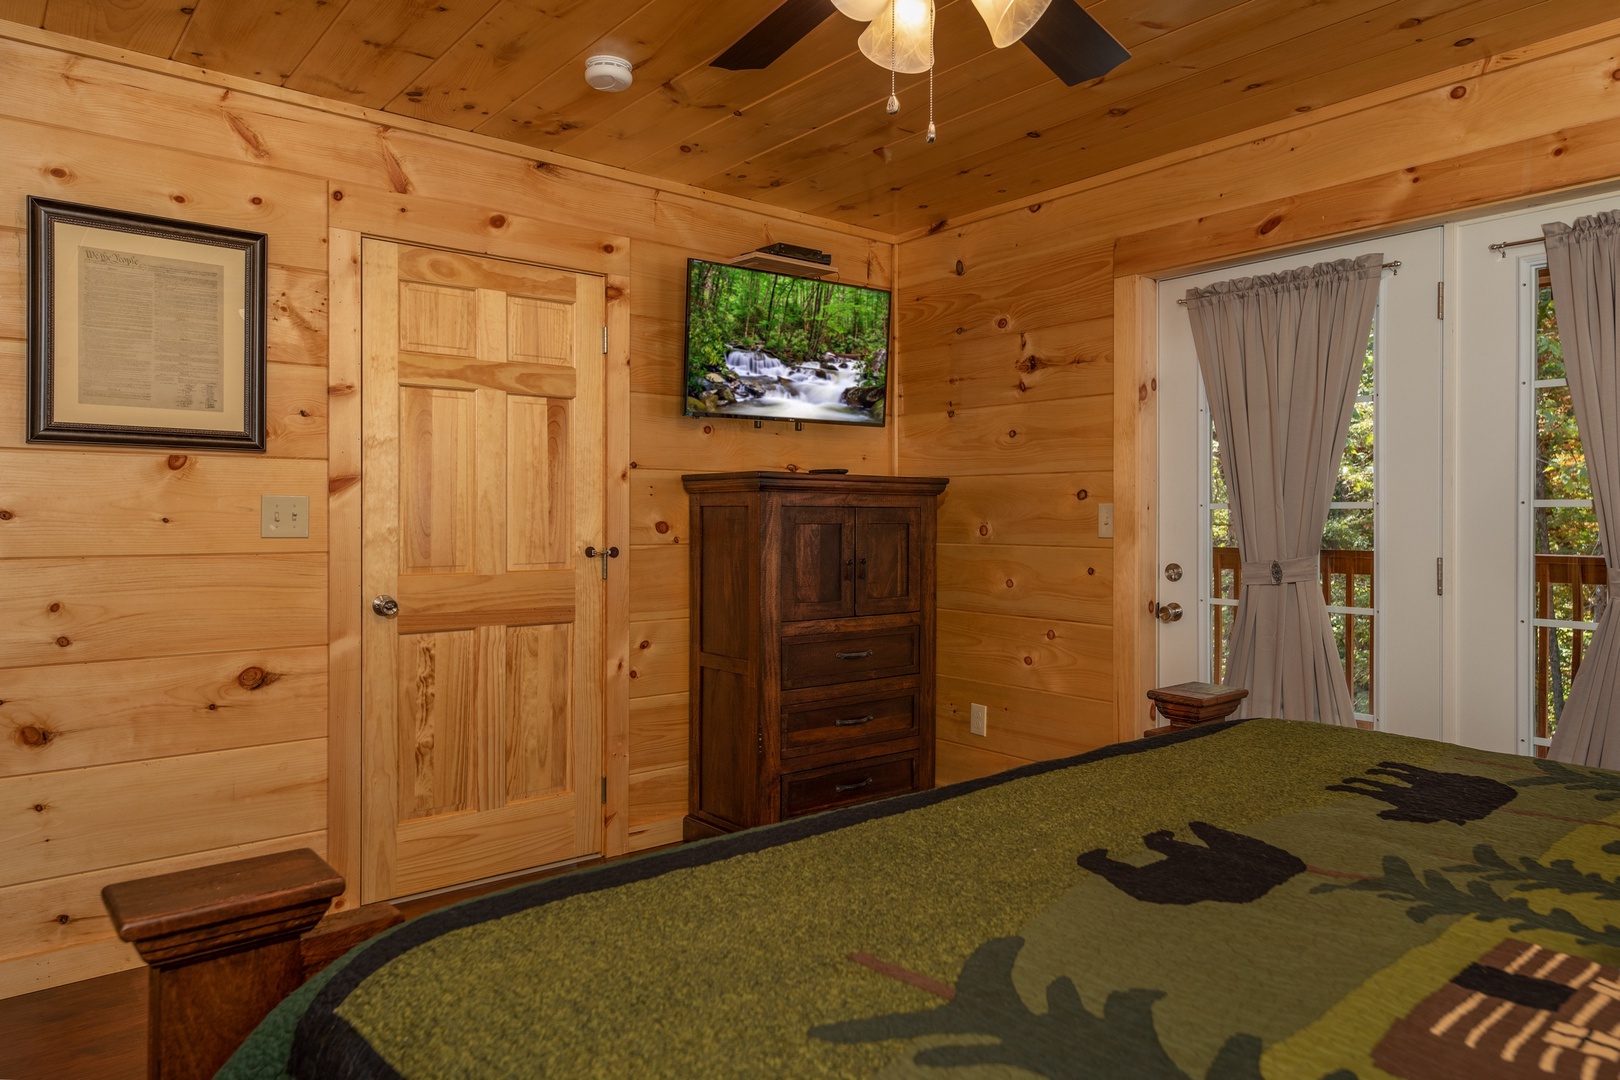 TV and dresser in a bedroom at Gar Bear's Hideaway, a 3 bedroom cabin rental located in Pigeon Forge